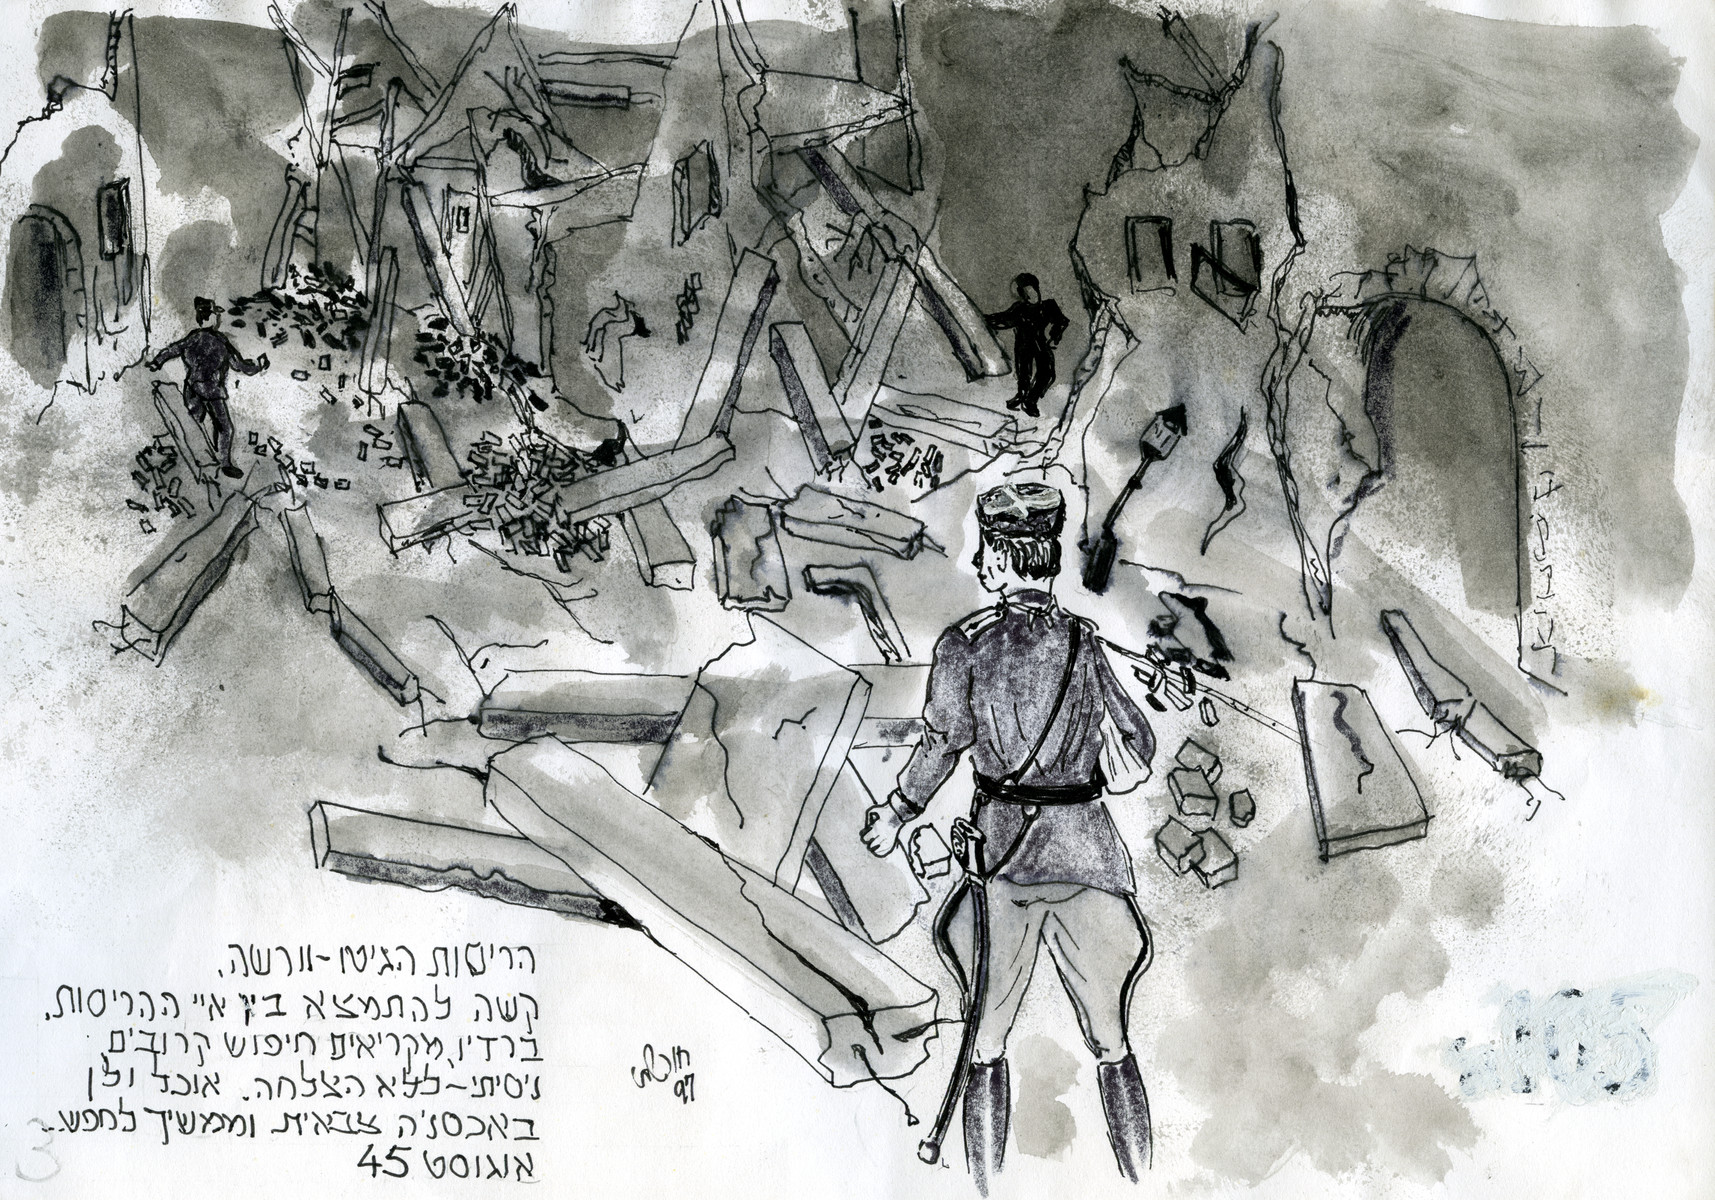 Page of a pictoral memoir drawn by the donor documenting his experiences after the Holocaust showing the artist searching unsuccessfully in the ruins of the detroyed Warsaw ghetto for any relatives.